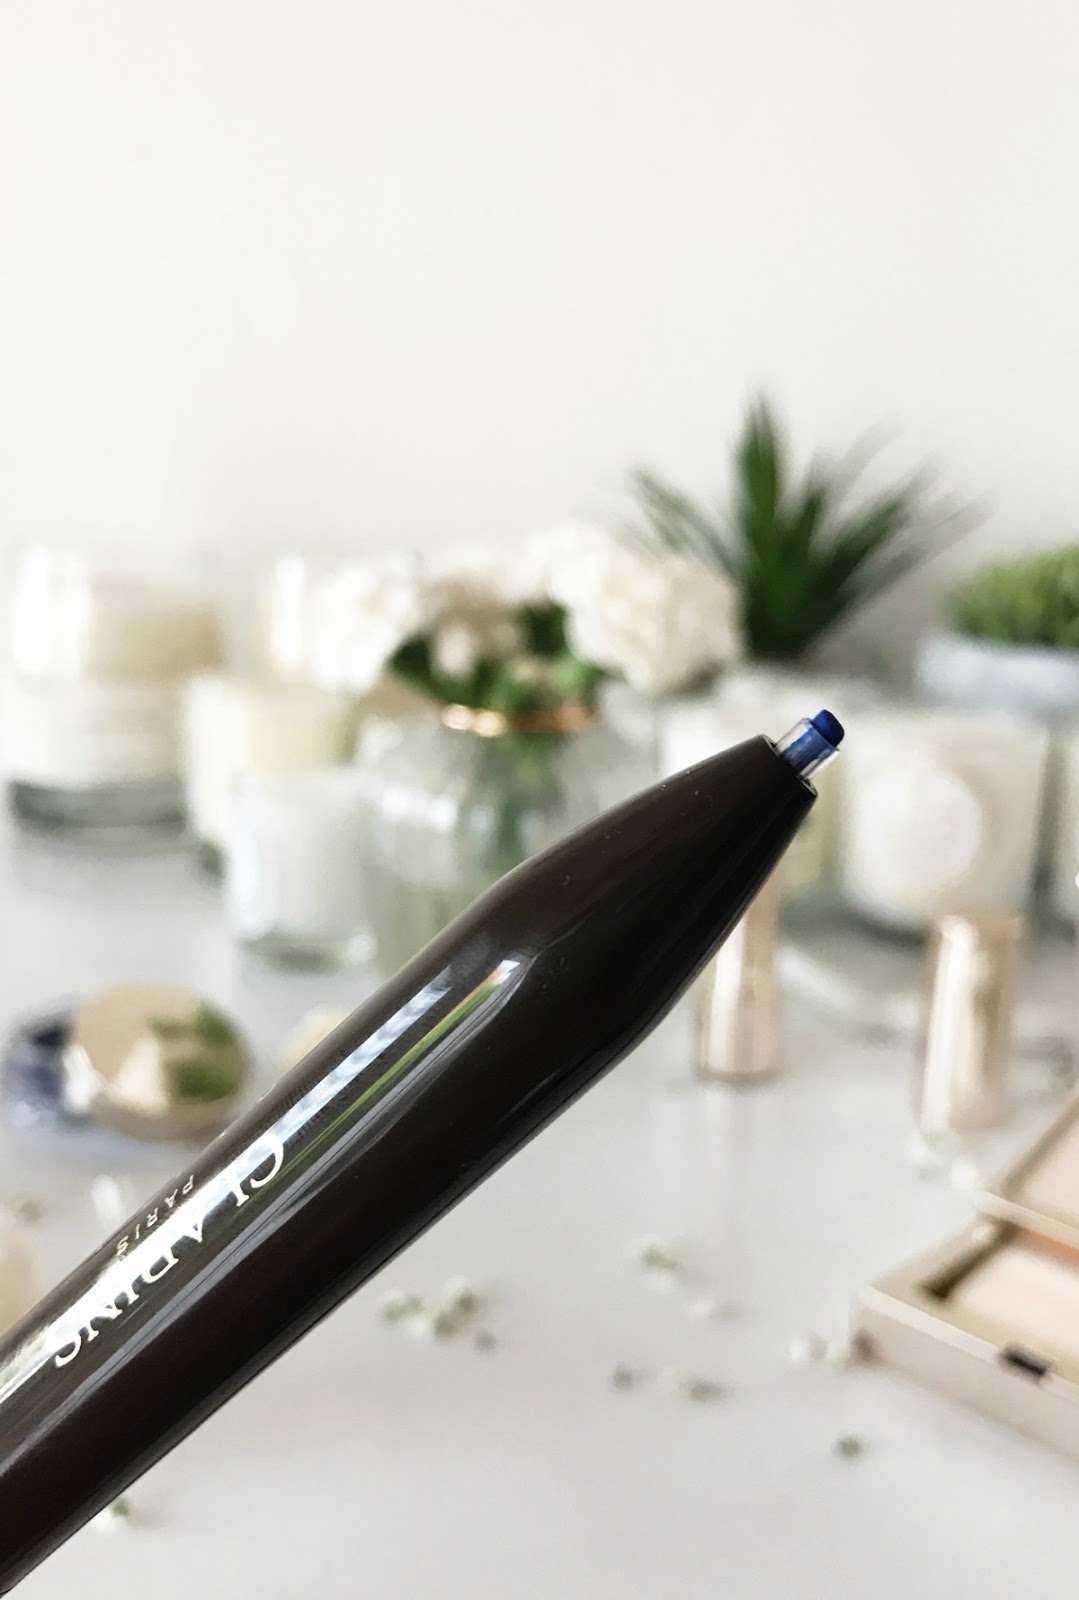 Clarins 4-Colour Pen Liners Review Swatches